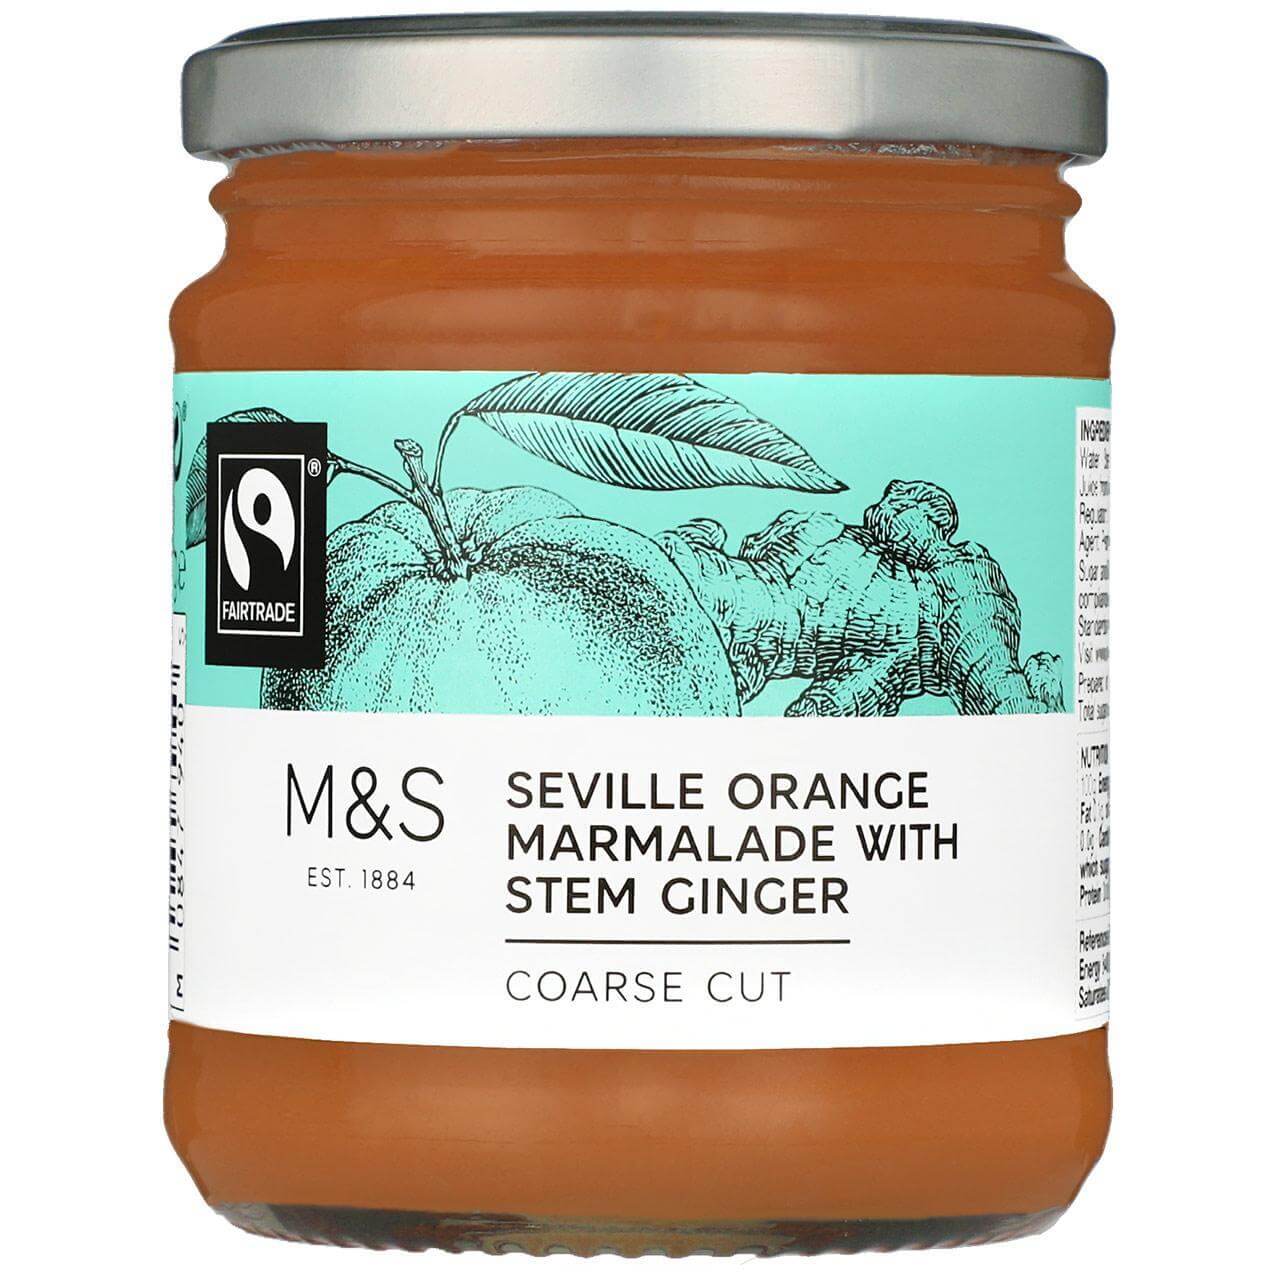 Image of M&S Marmalade by Marks & Spencer Food, designed, produced or made in the UK. Buying this product supports a UK business, jobs and the local community.